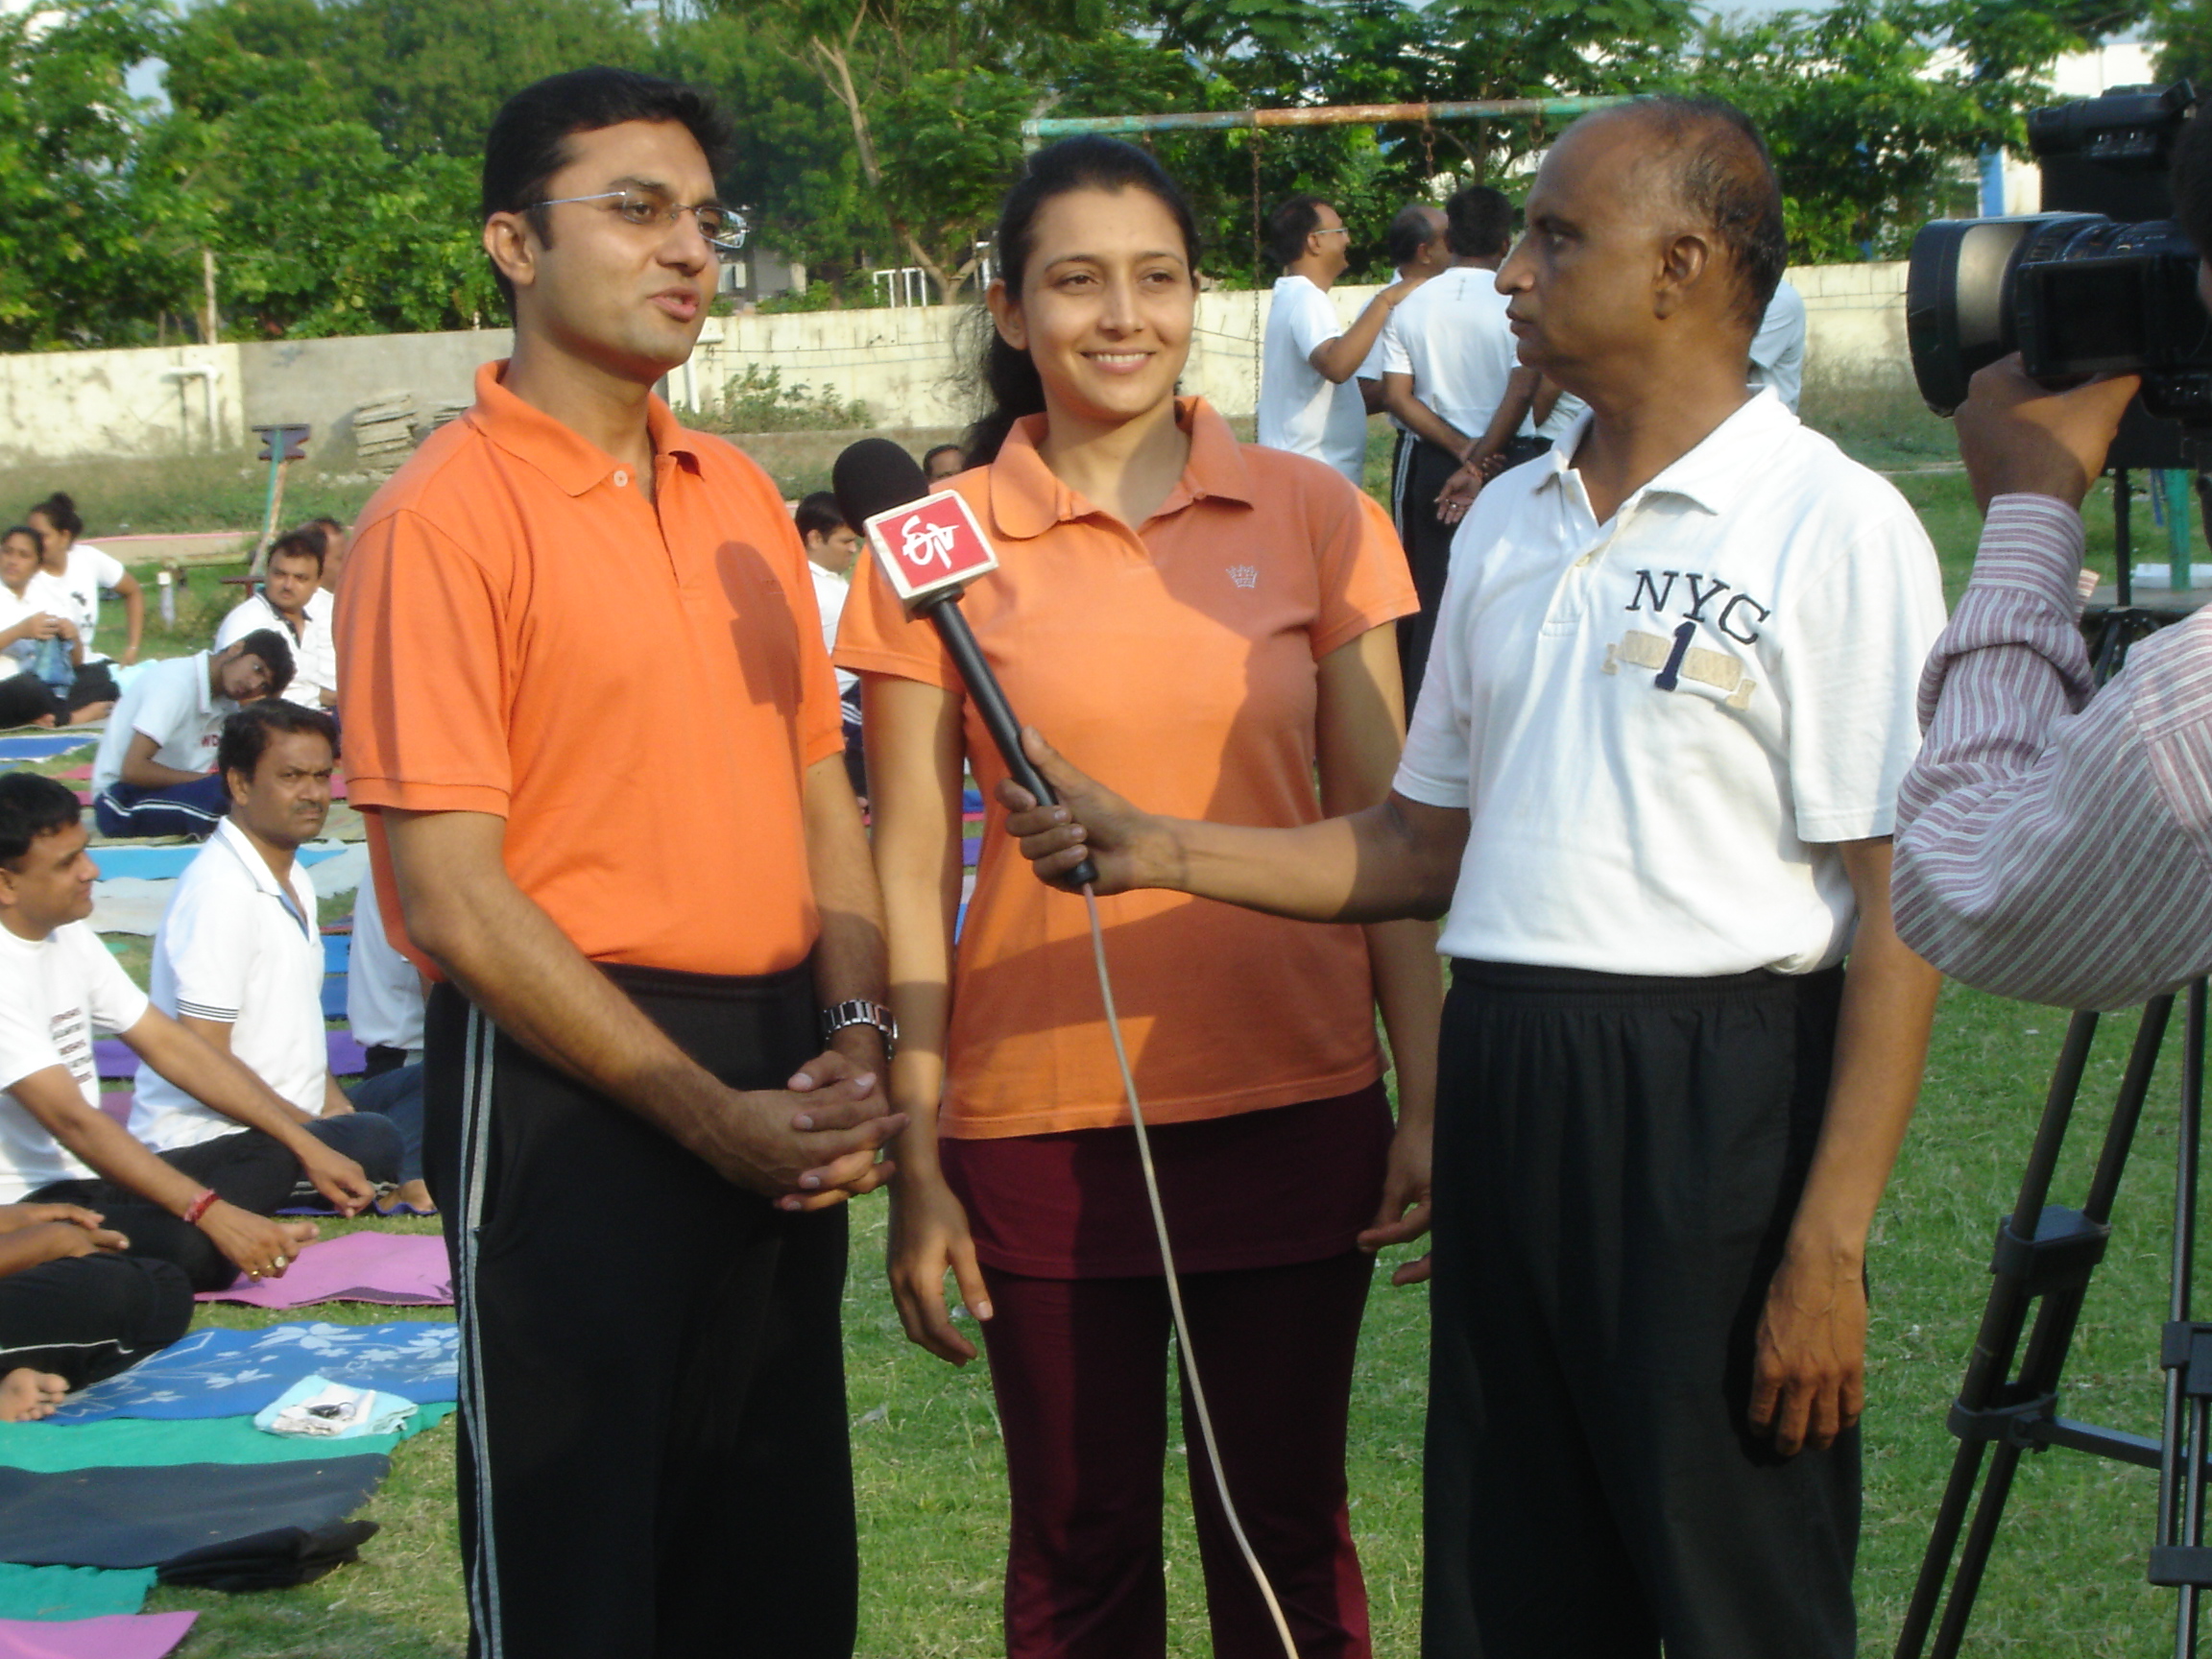 Media is taking notice of our wellness activities for community, 2015 